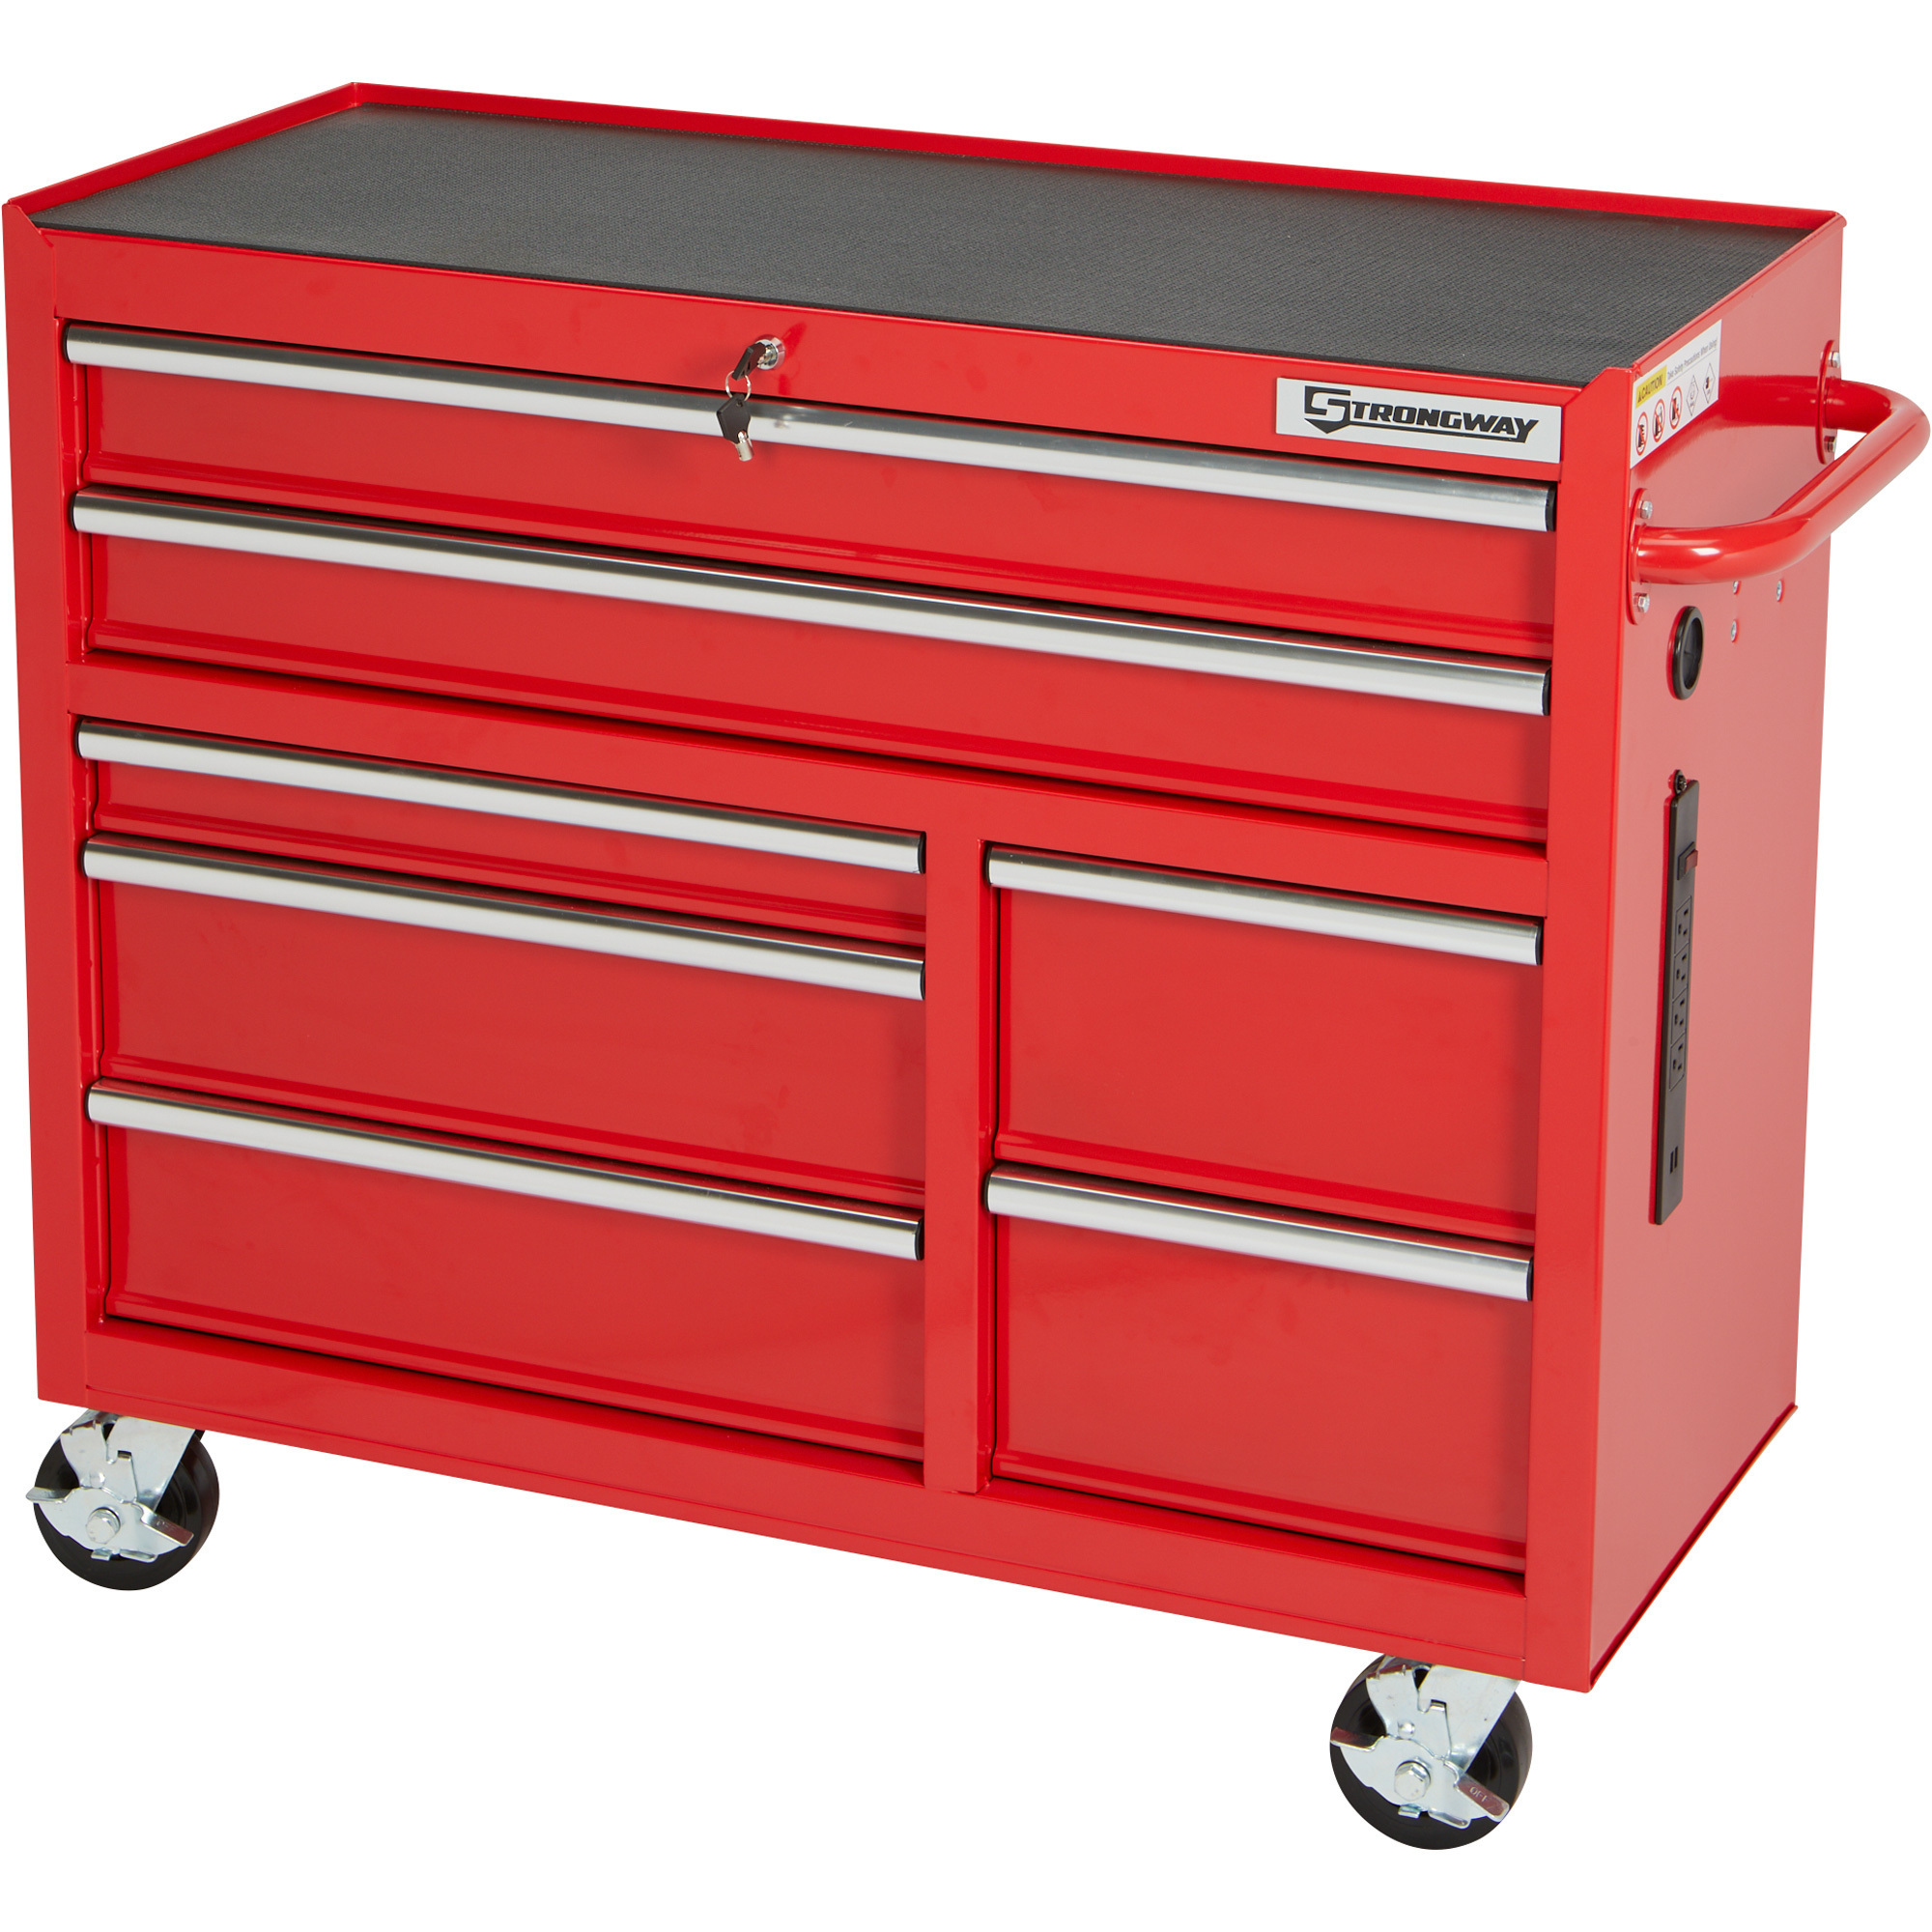 Strongway 7-Drawer Rolling Cabinet, 42Inch W x 18Inch D x 36.6Inch H